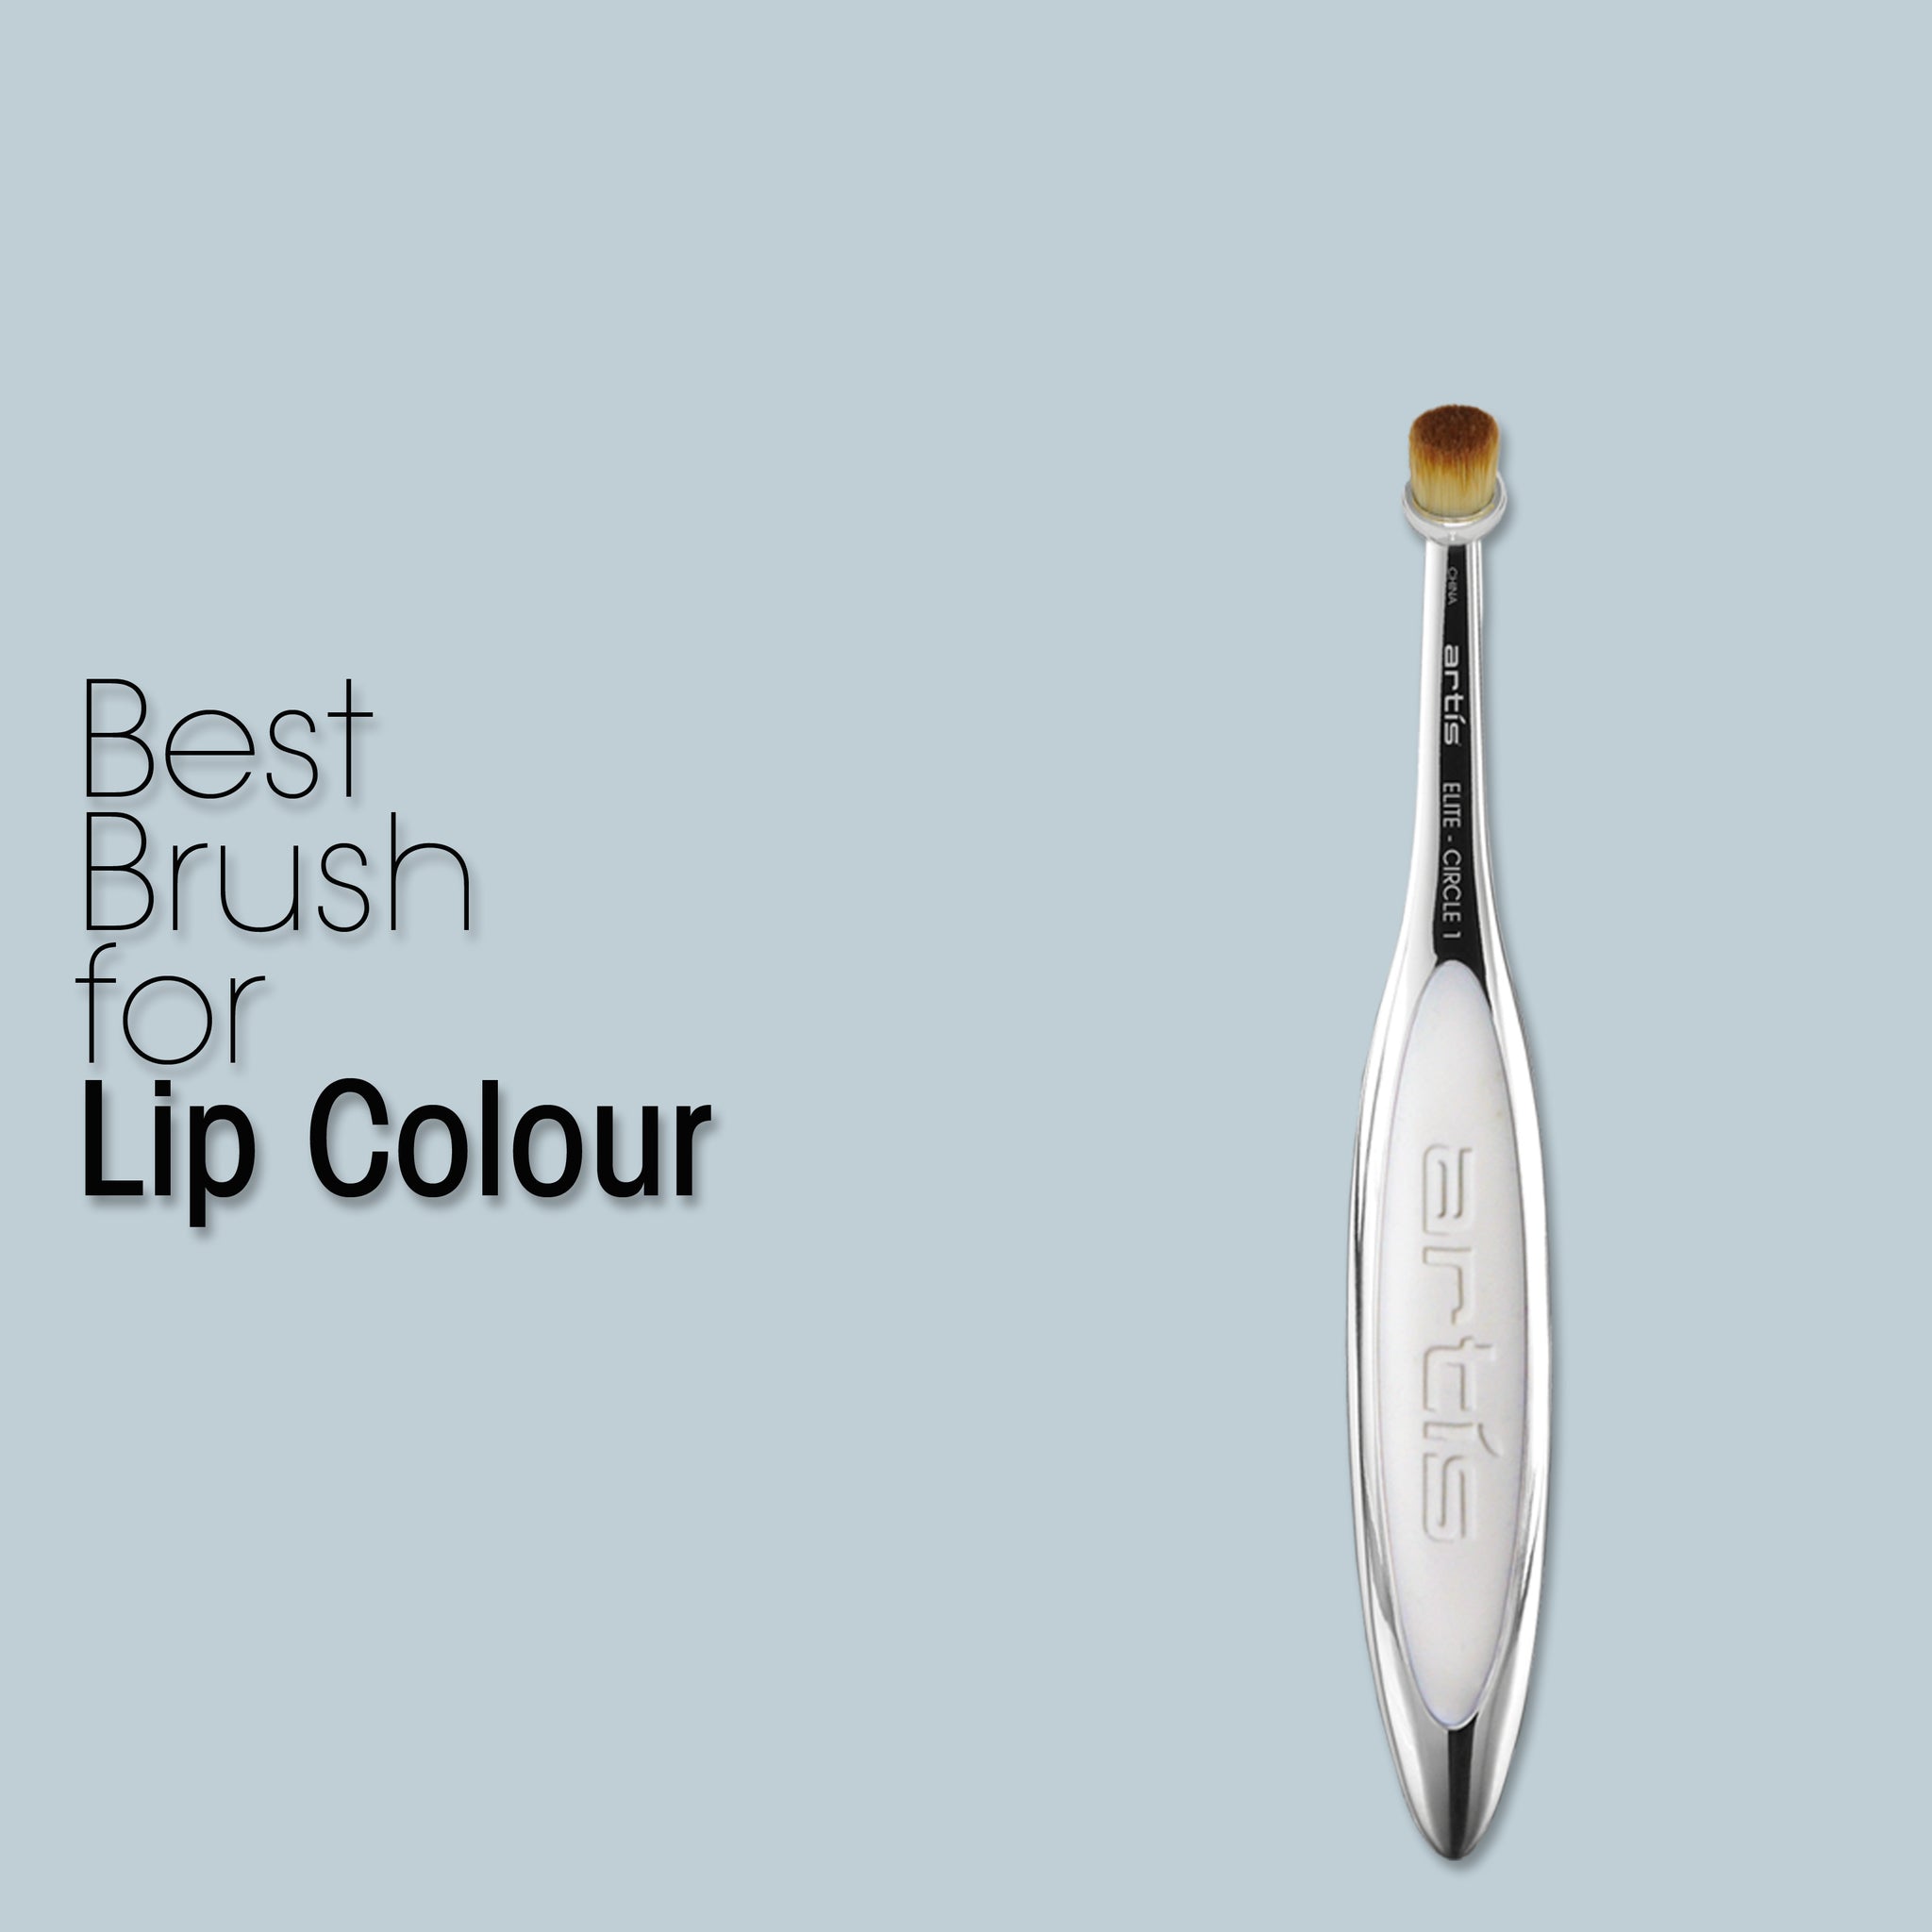 this image is the elite circle 1 brush which is deemed the best brush for lip colour use.